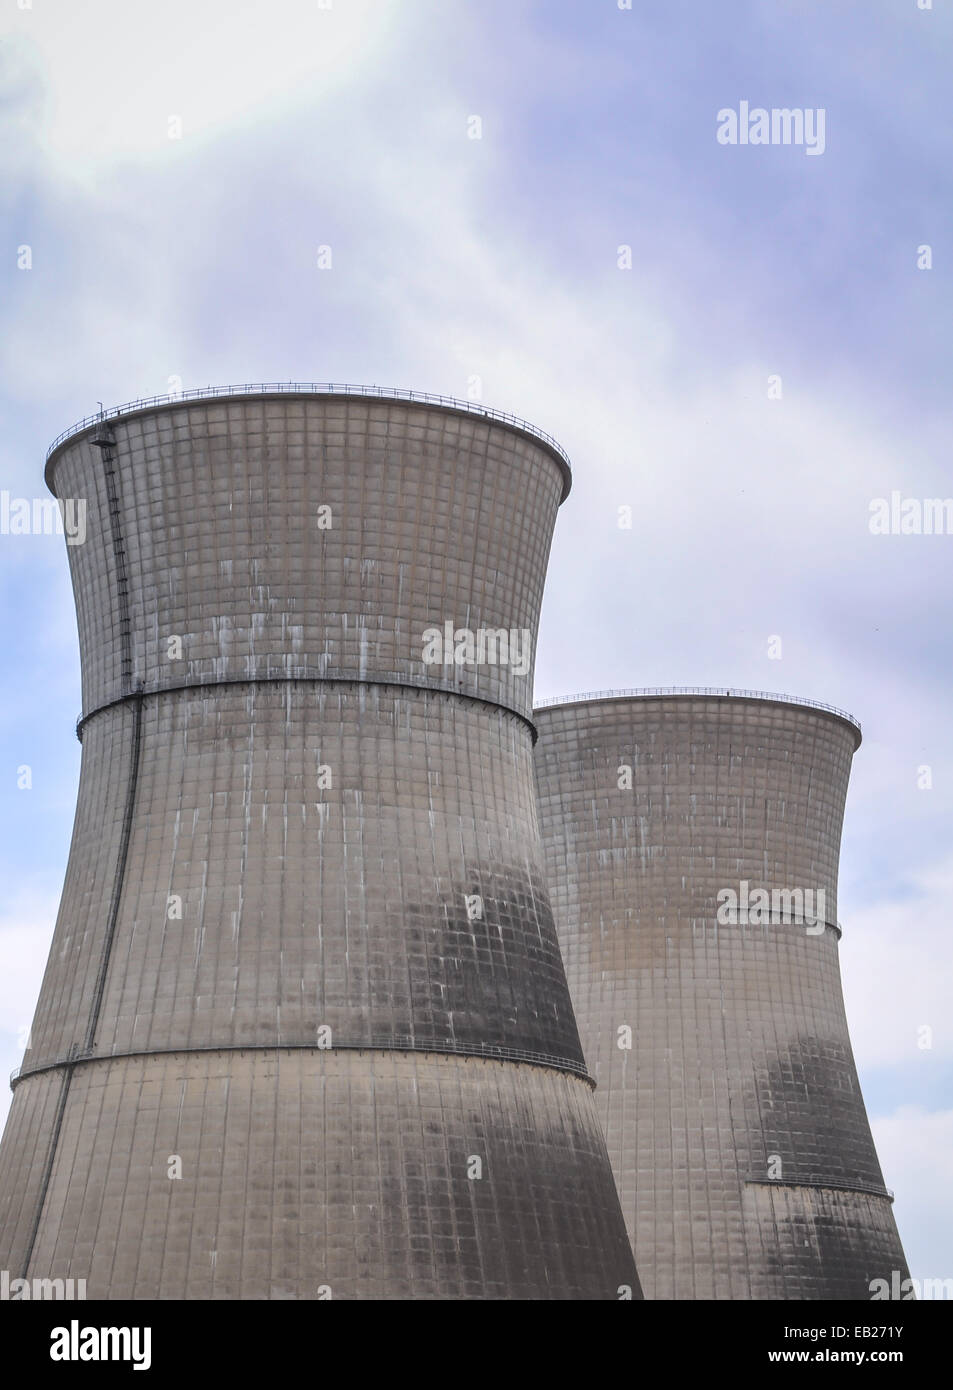 Rancho Seco nuclear power plant cooling towers Stock Photo